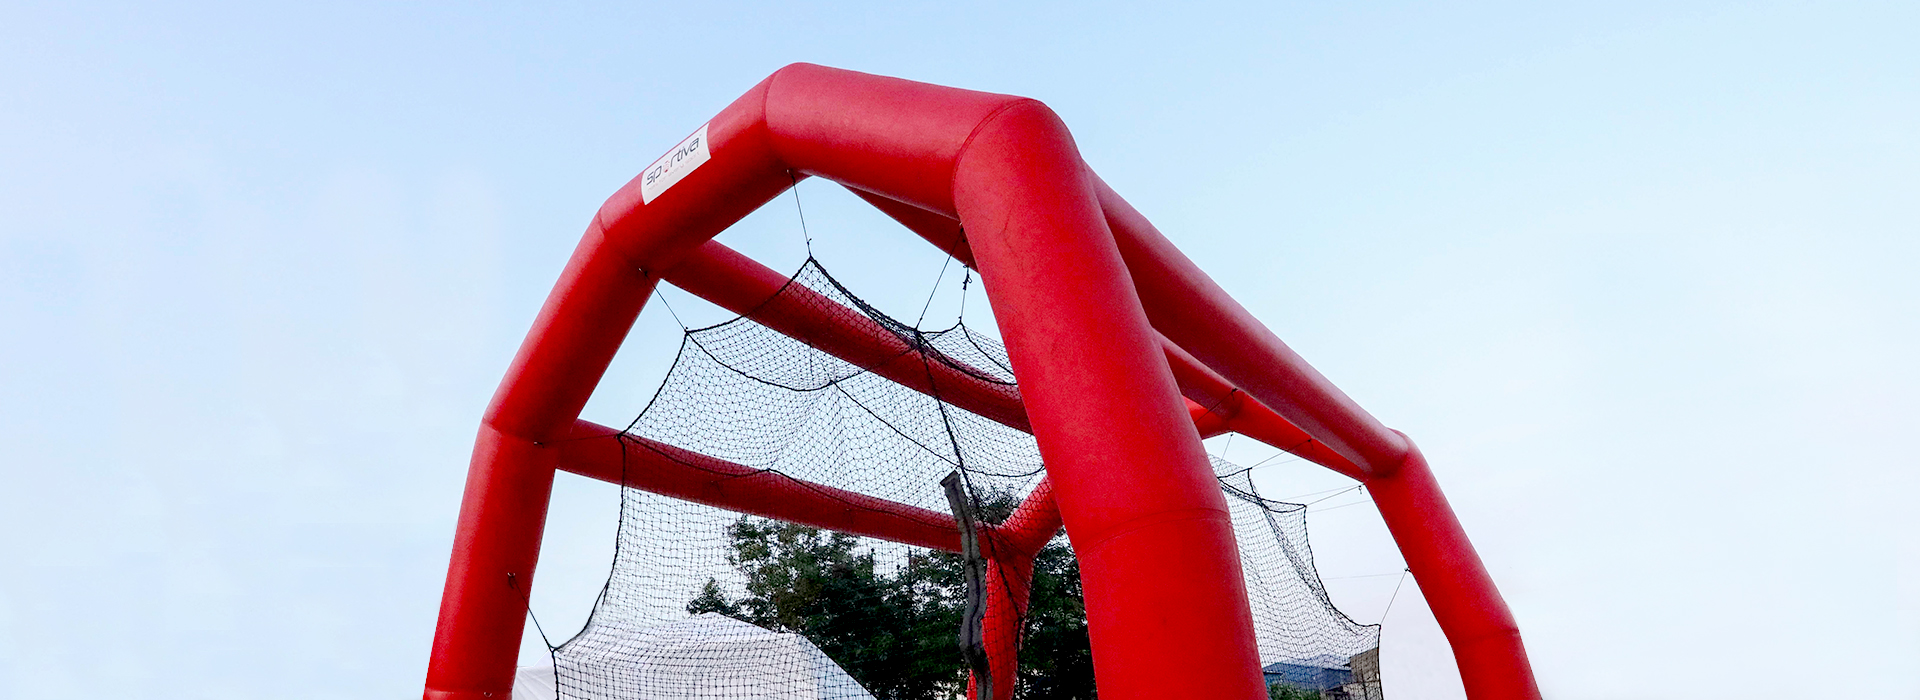 Inflatable Batting Cage